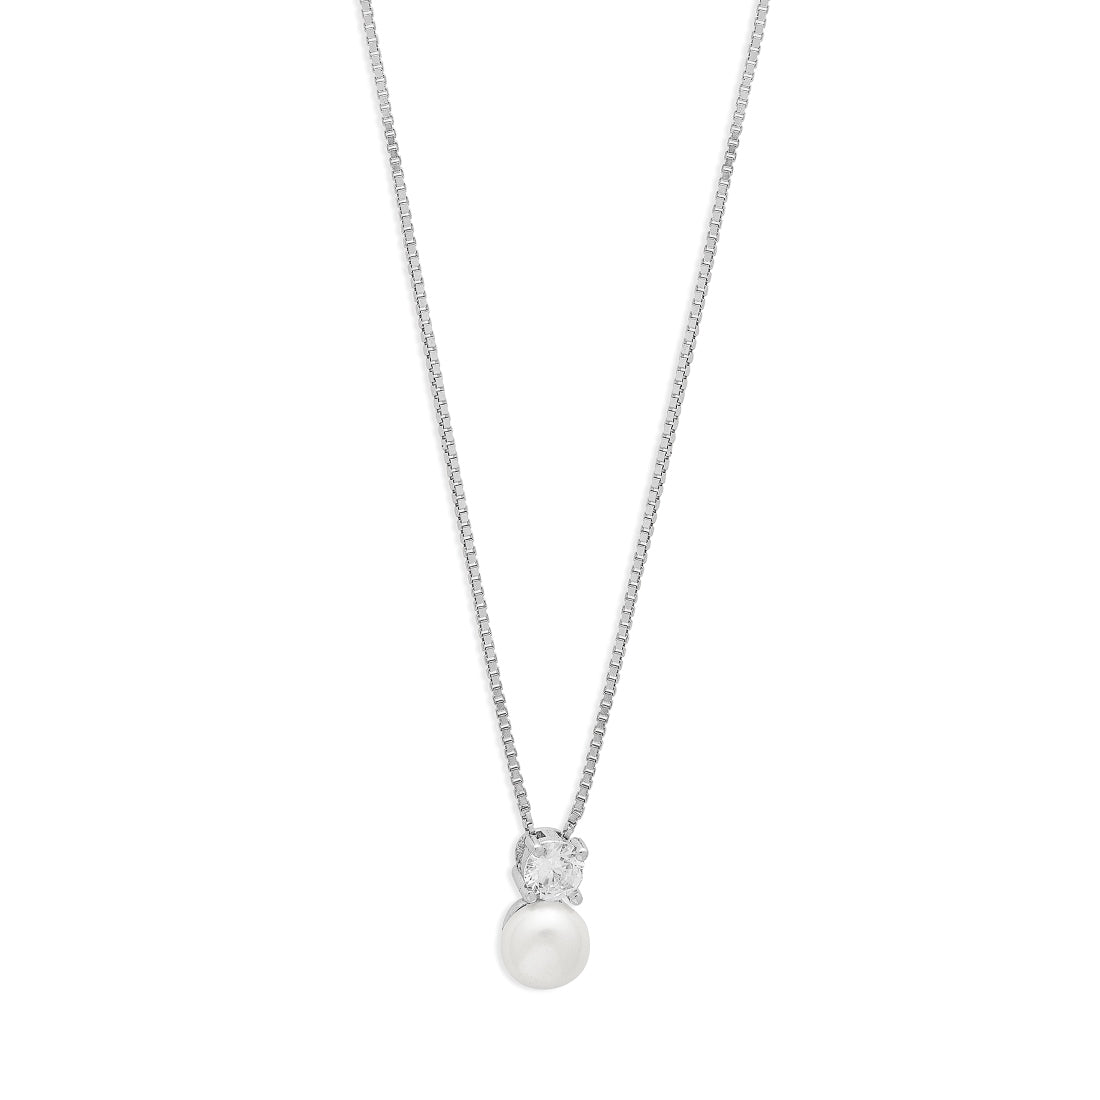 Eternal Elegance Rhodium-Plated 925 Sterling Silver Pendant with Chain